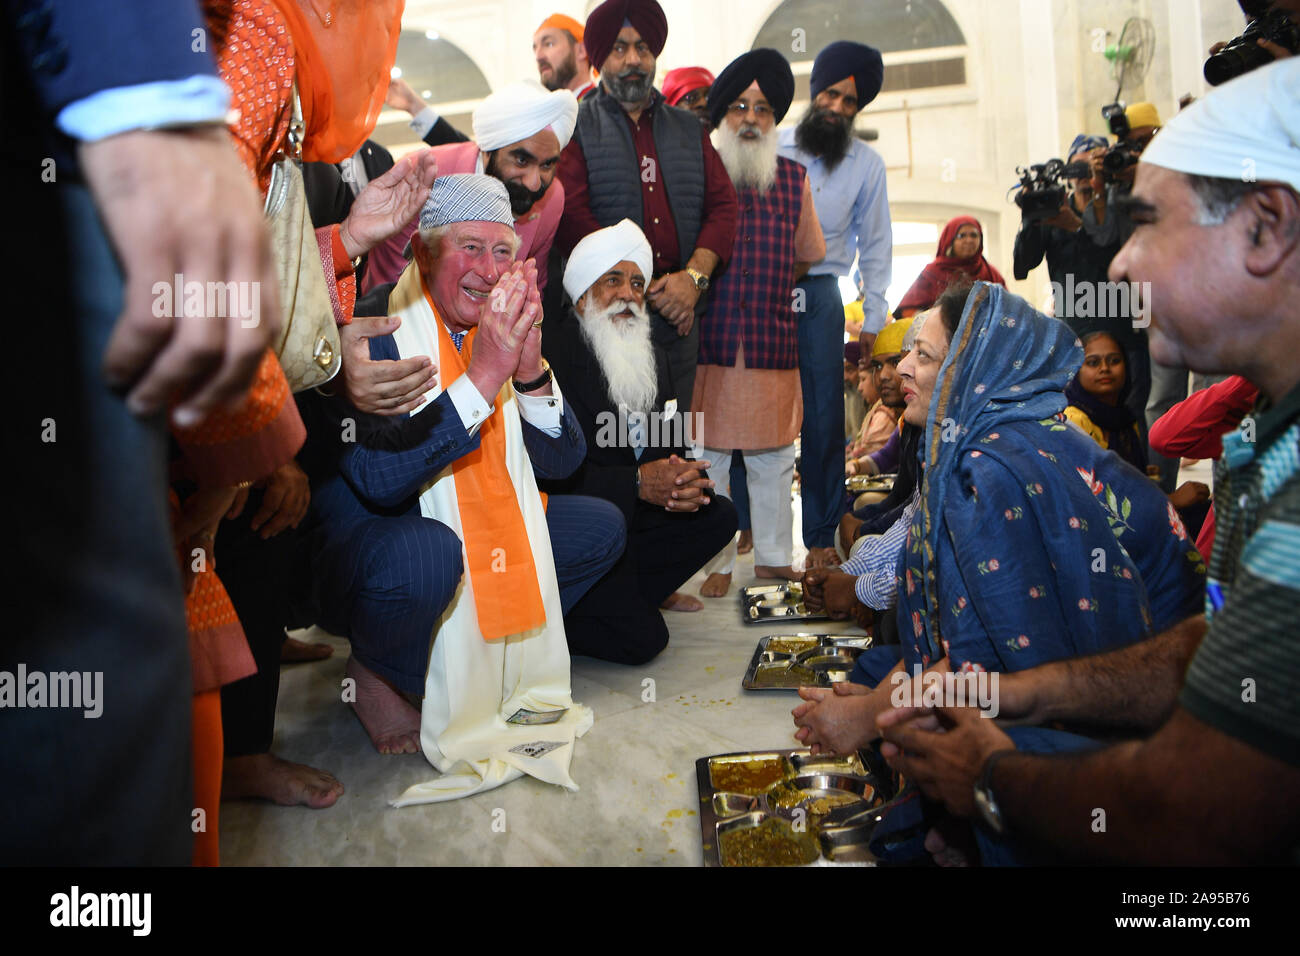 The Prince of Wales speaks with worshippers as he visits the Bangla Sahib Gurdwara Sikh Temple, New Delhi, to celebrate the 550th anniversary of the birth of Guru Nanak, the founder of Sikhism, on day one of the royal visit to India. Stock Photo